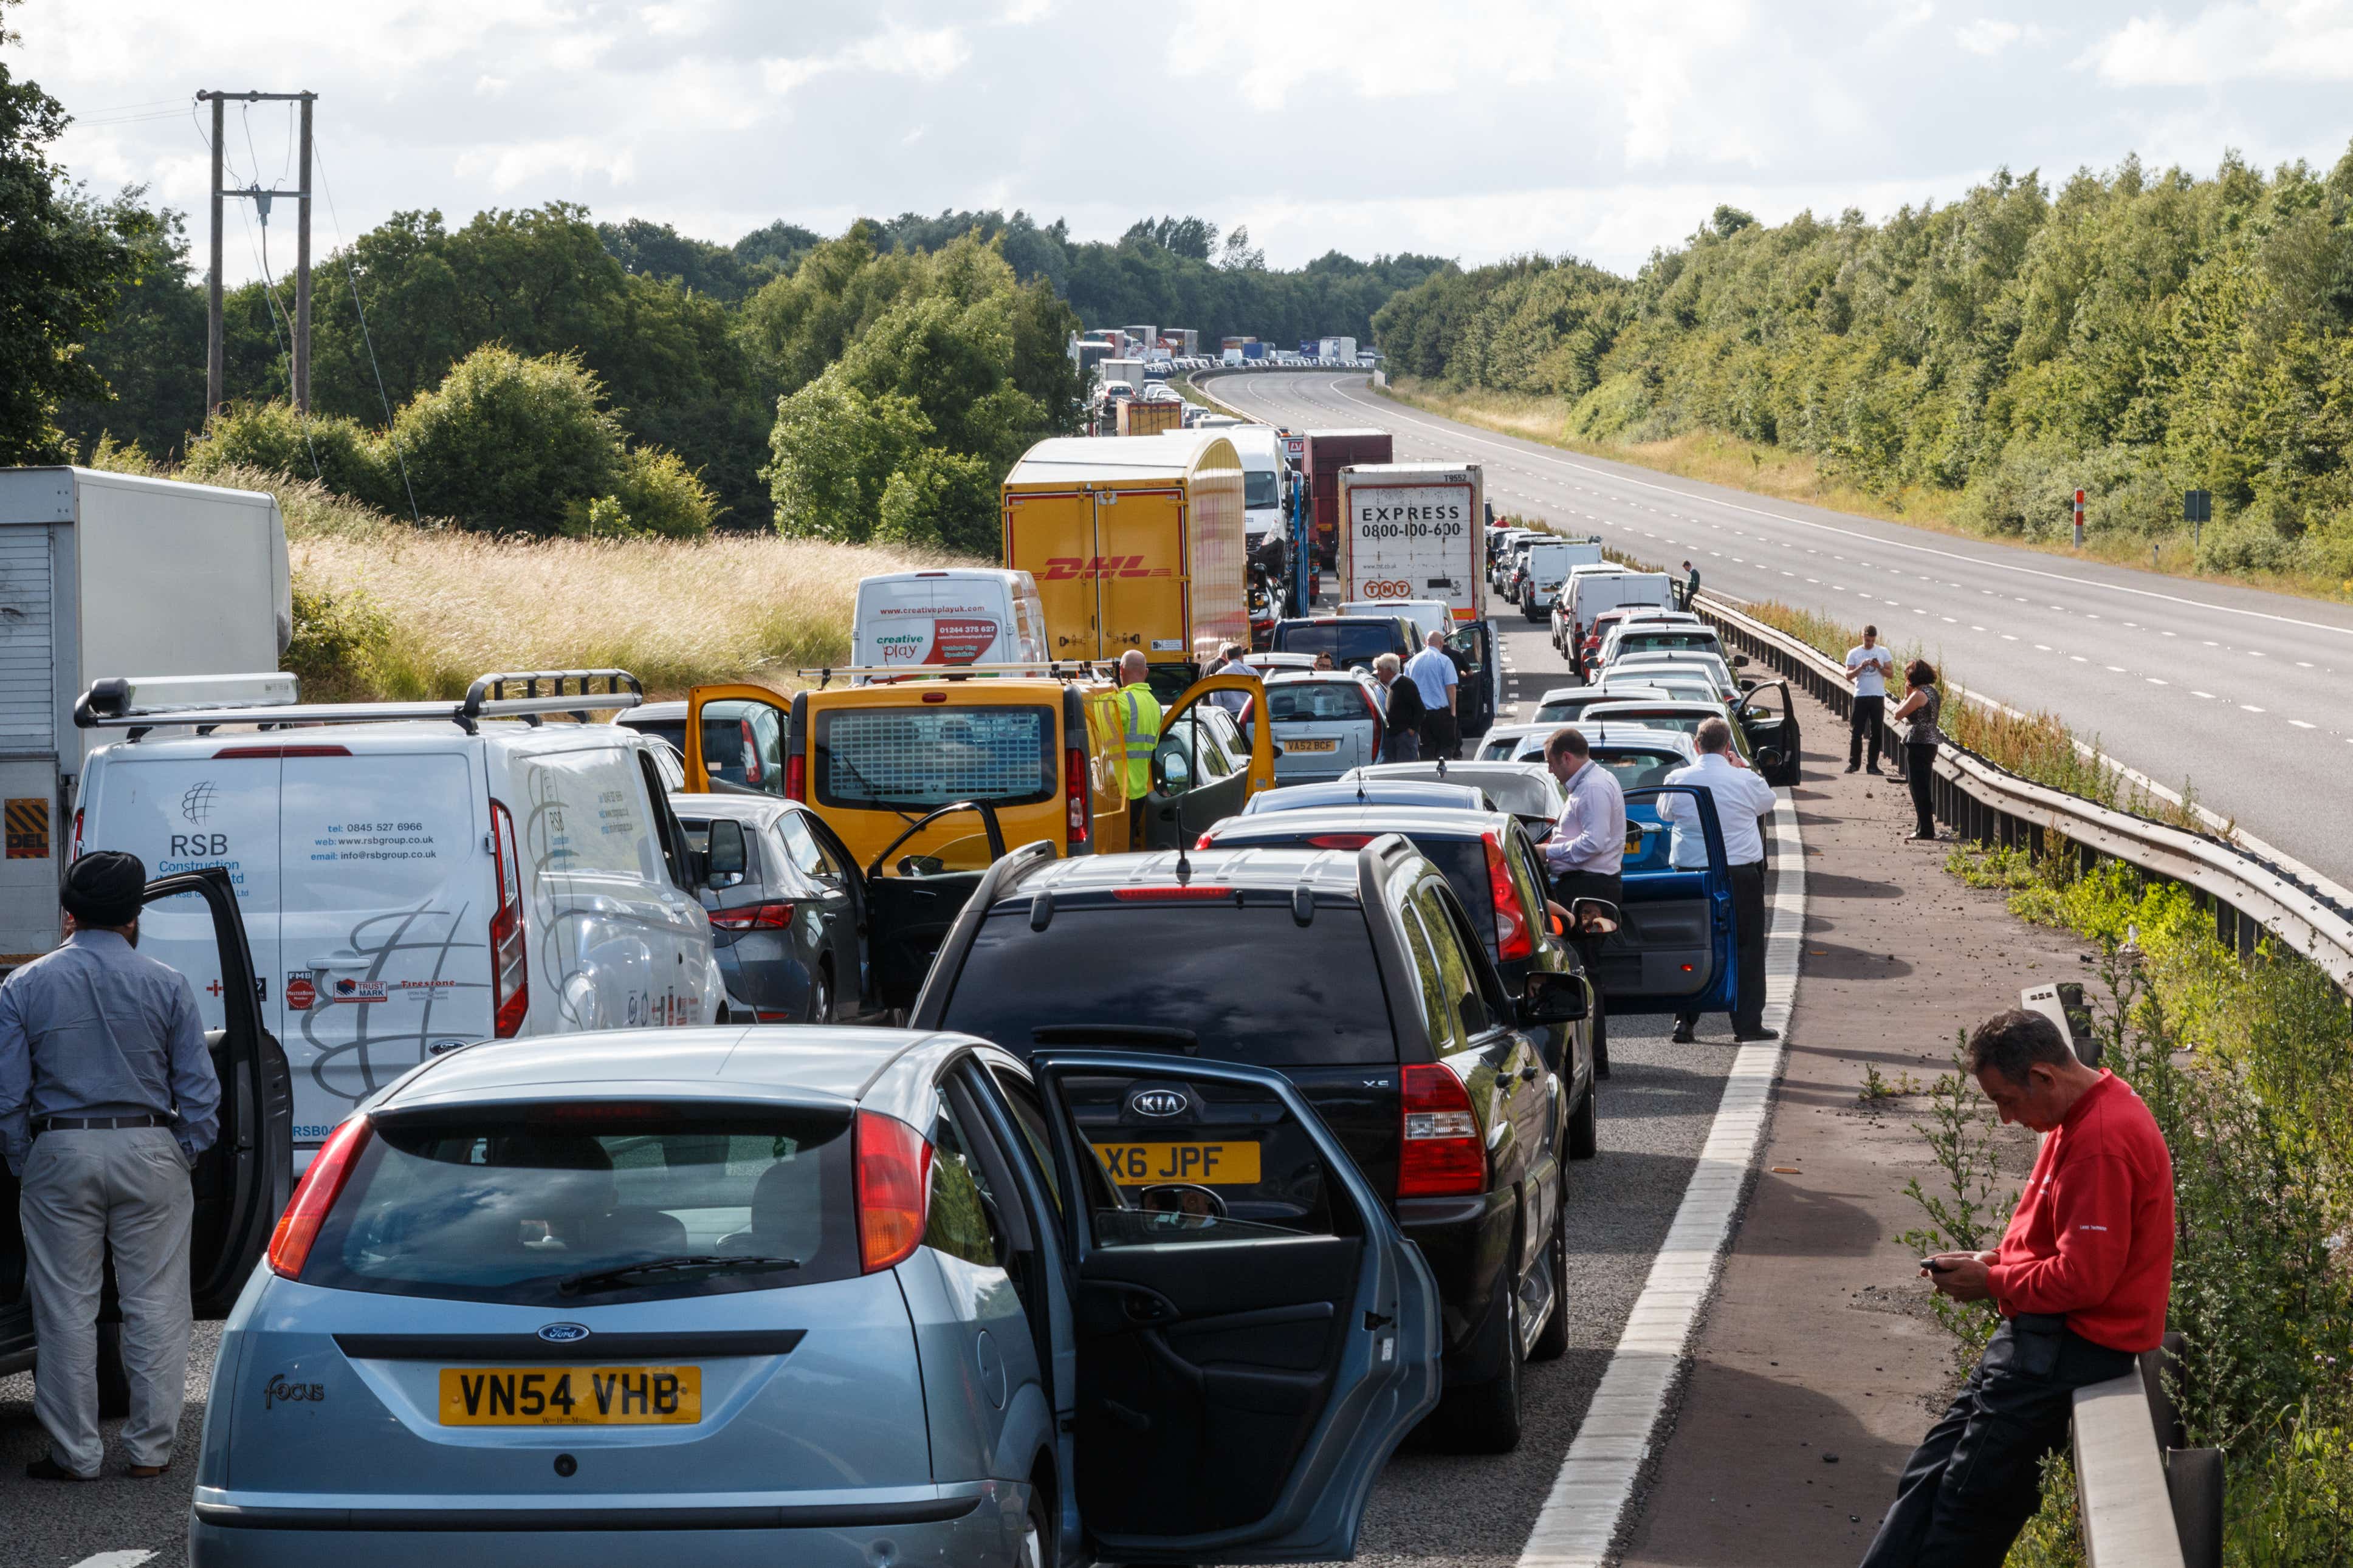 Warwickshire,UK - June 28th 2015:Drivers standing next to lines of queing traffic in a motorway traffic jam after an accident. This happened on the M40 in England.